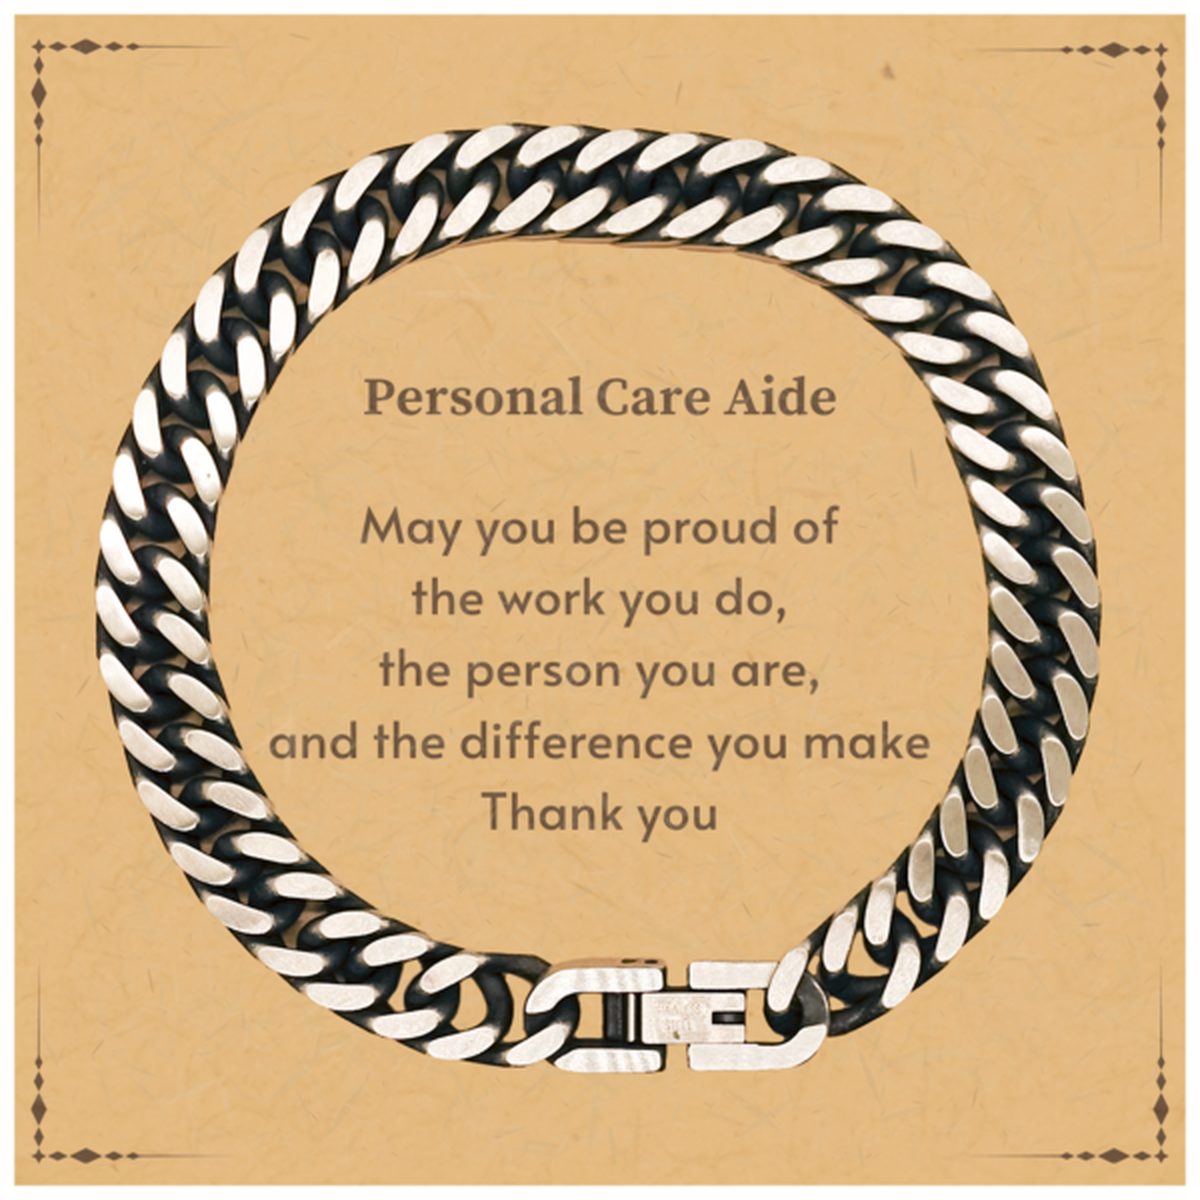 Heartwarming Cuban Link Chain Bracelet Retirement Coworkers Gifts for Personal Care Aide, Personal Care Aide May You be proud of the work you do, the person you are Gifts for Boss Men Women Friends